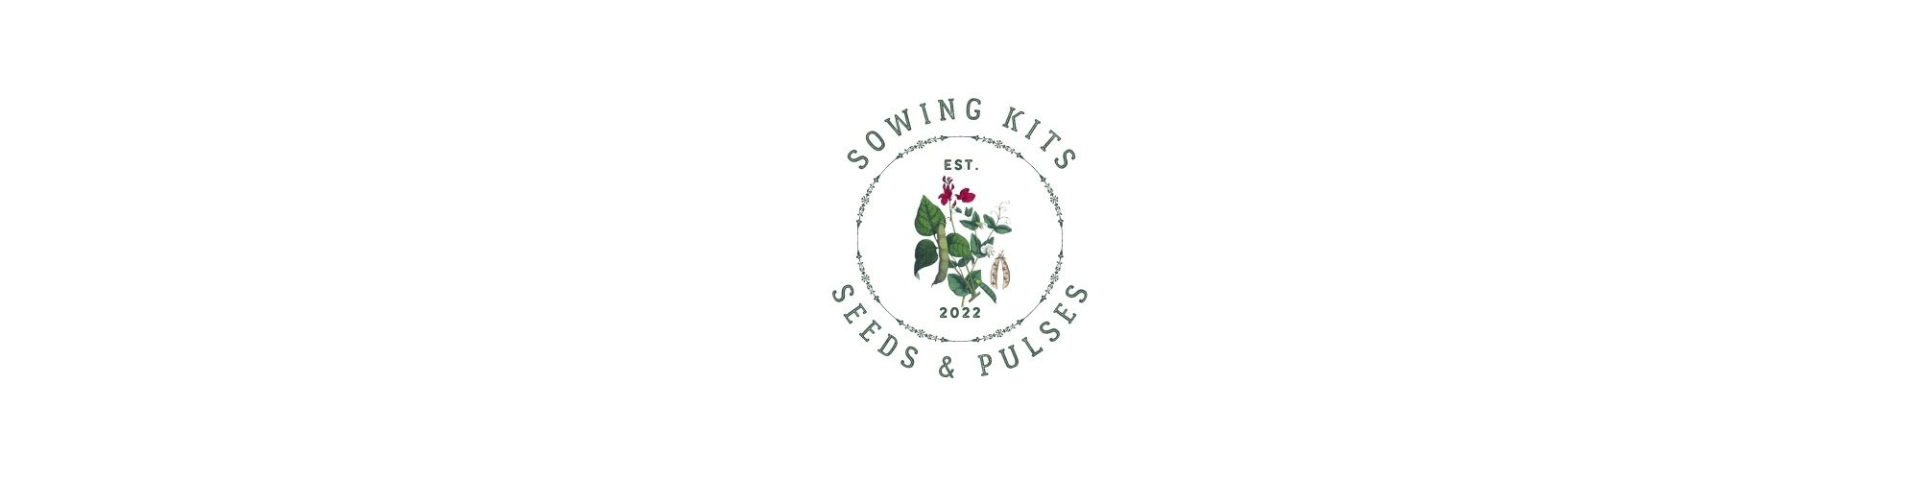 Sowing Kits Seeds & Pulses